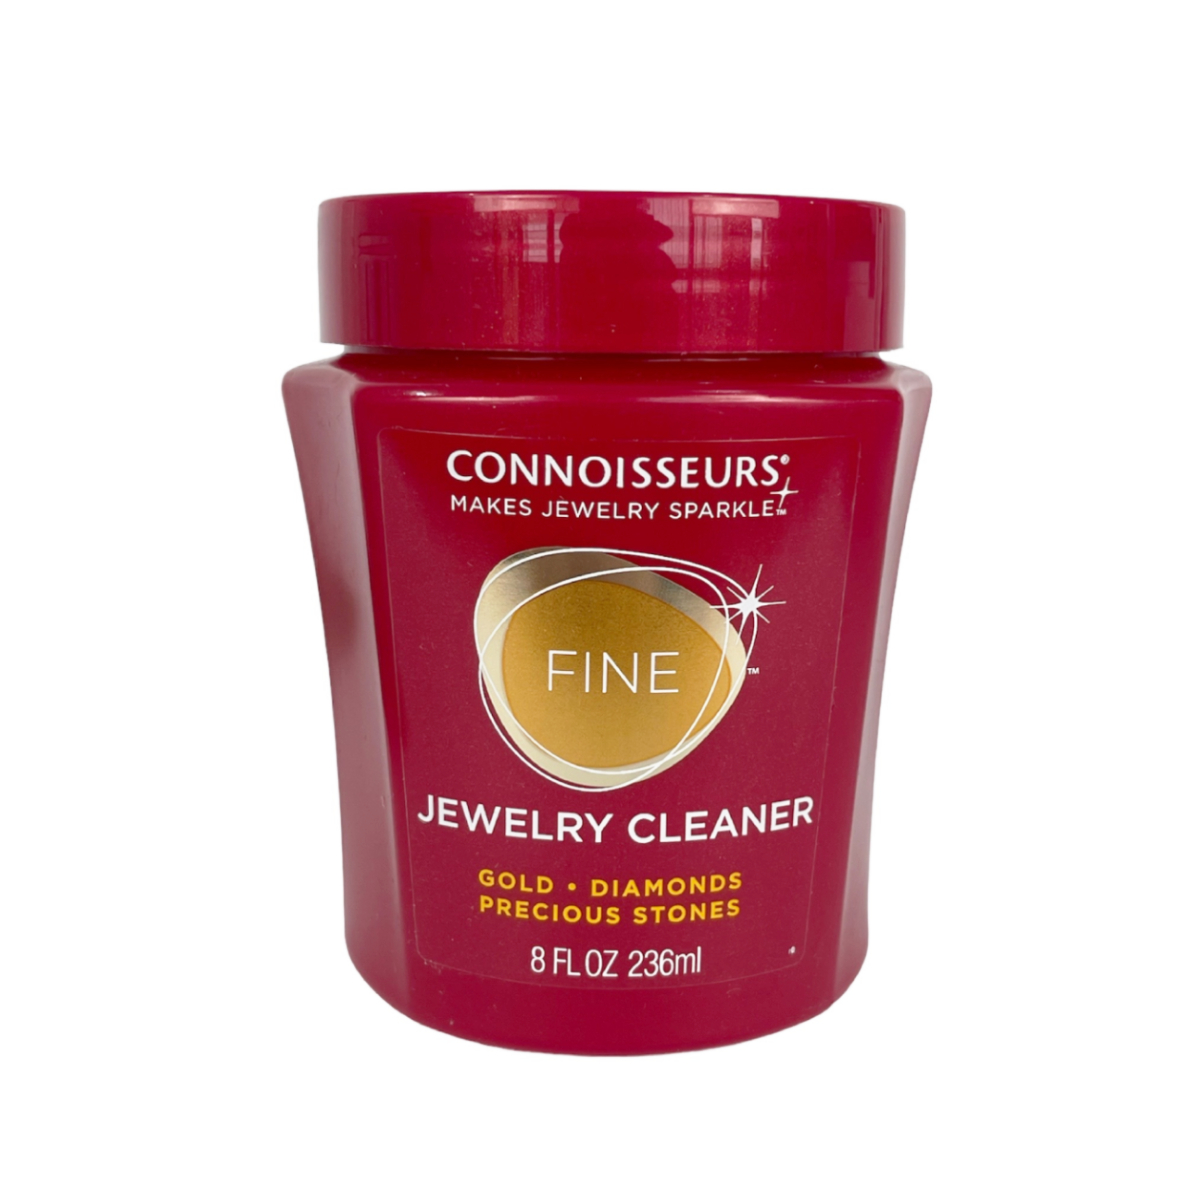 Connoisseurs Fine Jewellery Cleaner gold, platinum, diamonds and